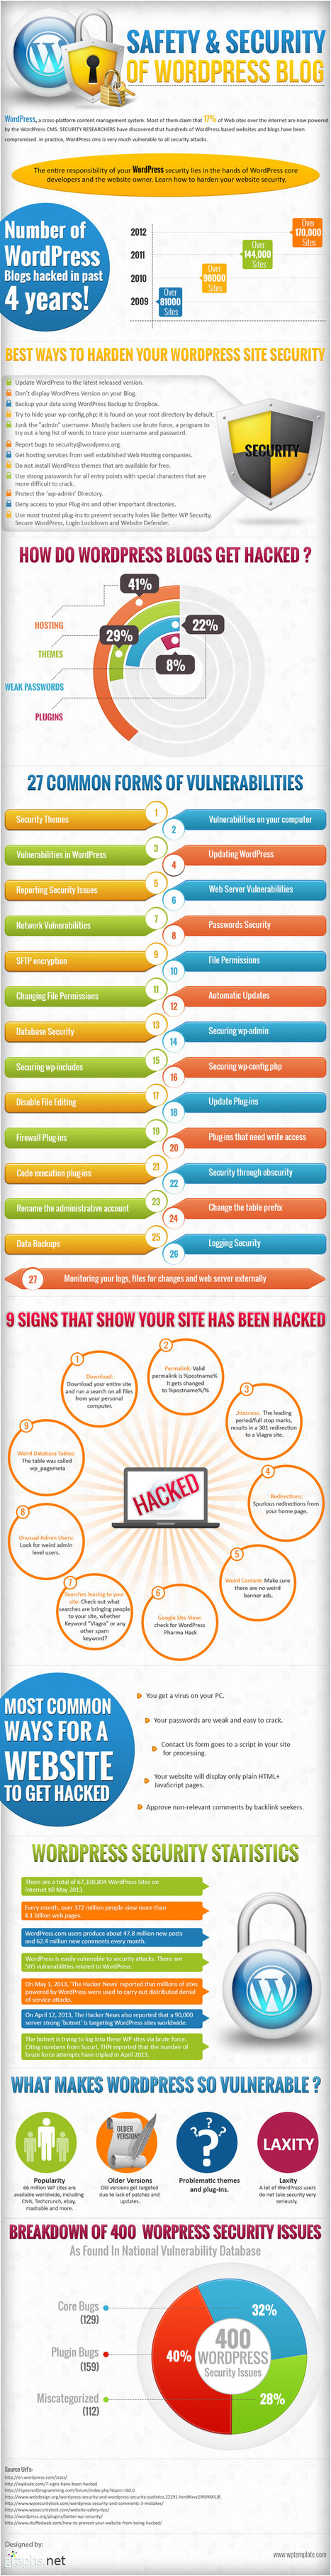 Safety and Security of WordPress Blog (Infographic) | Writing_me | Scoop.it